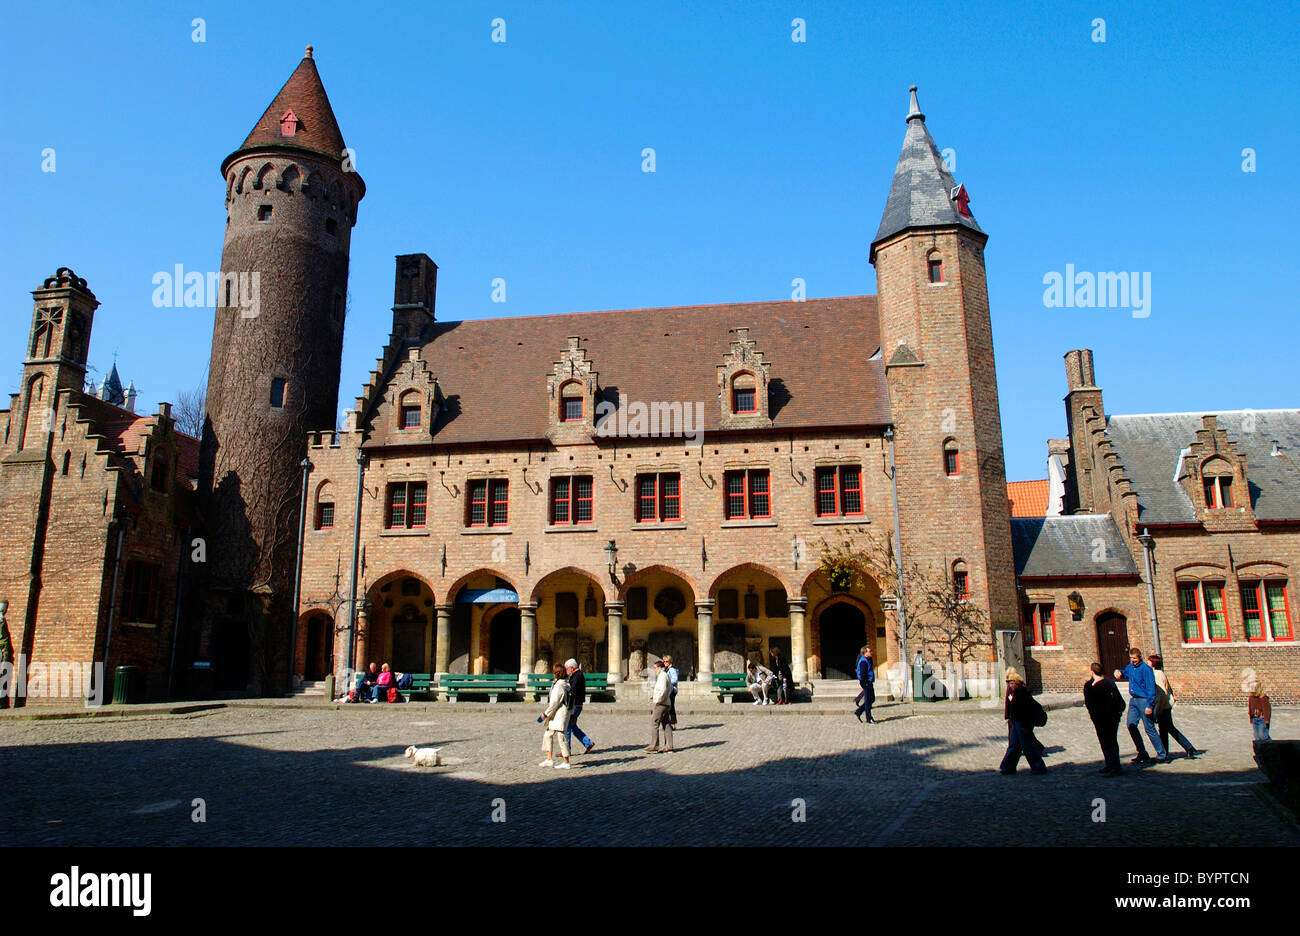 inner courtyard of Gruuthusemuseum with tourists, Bruges, Belgium Stock Photo